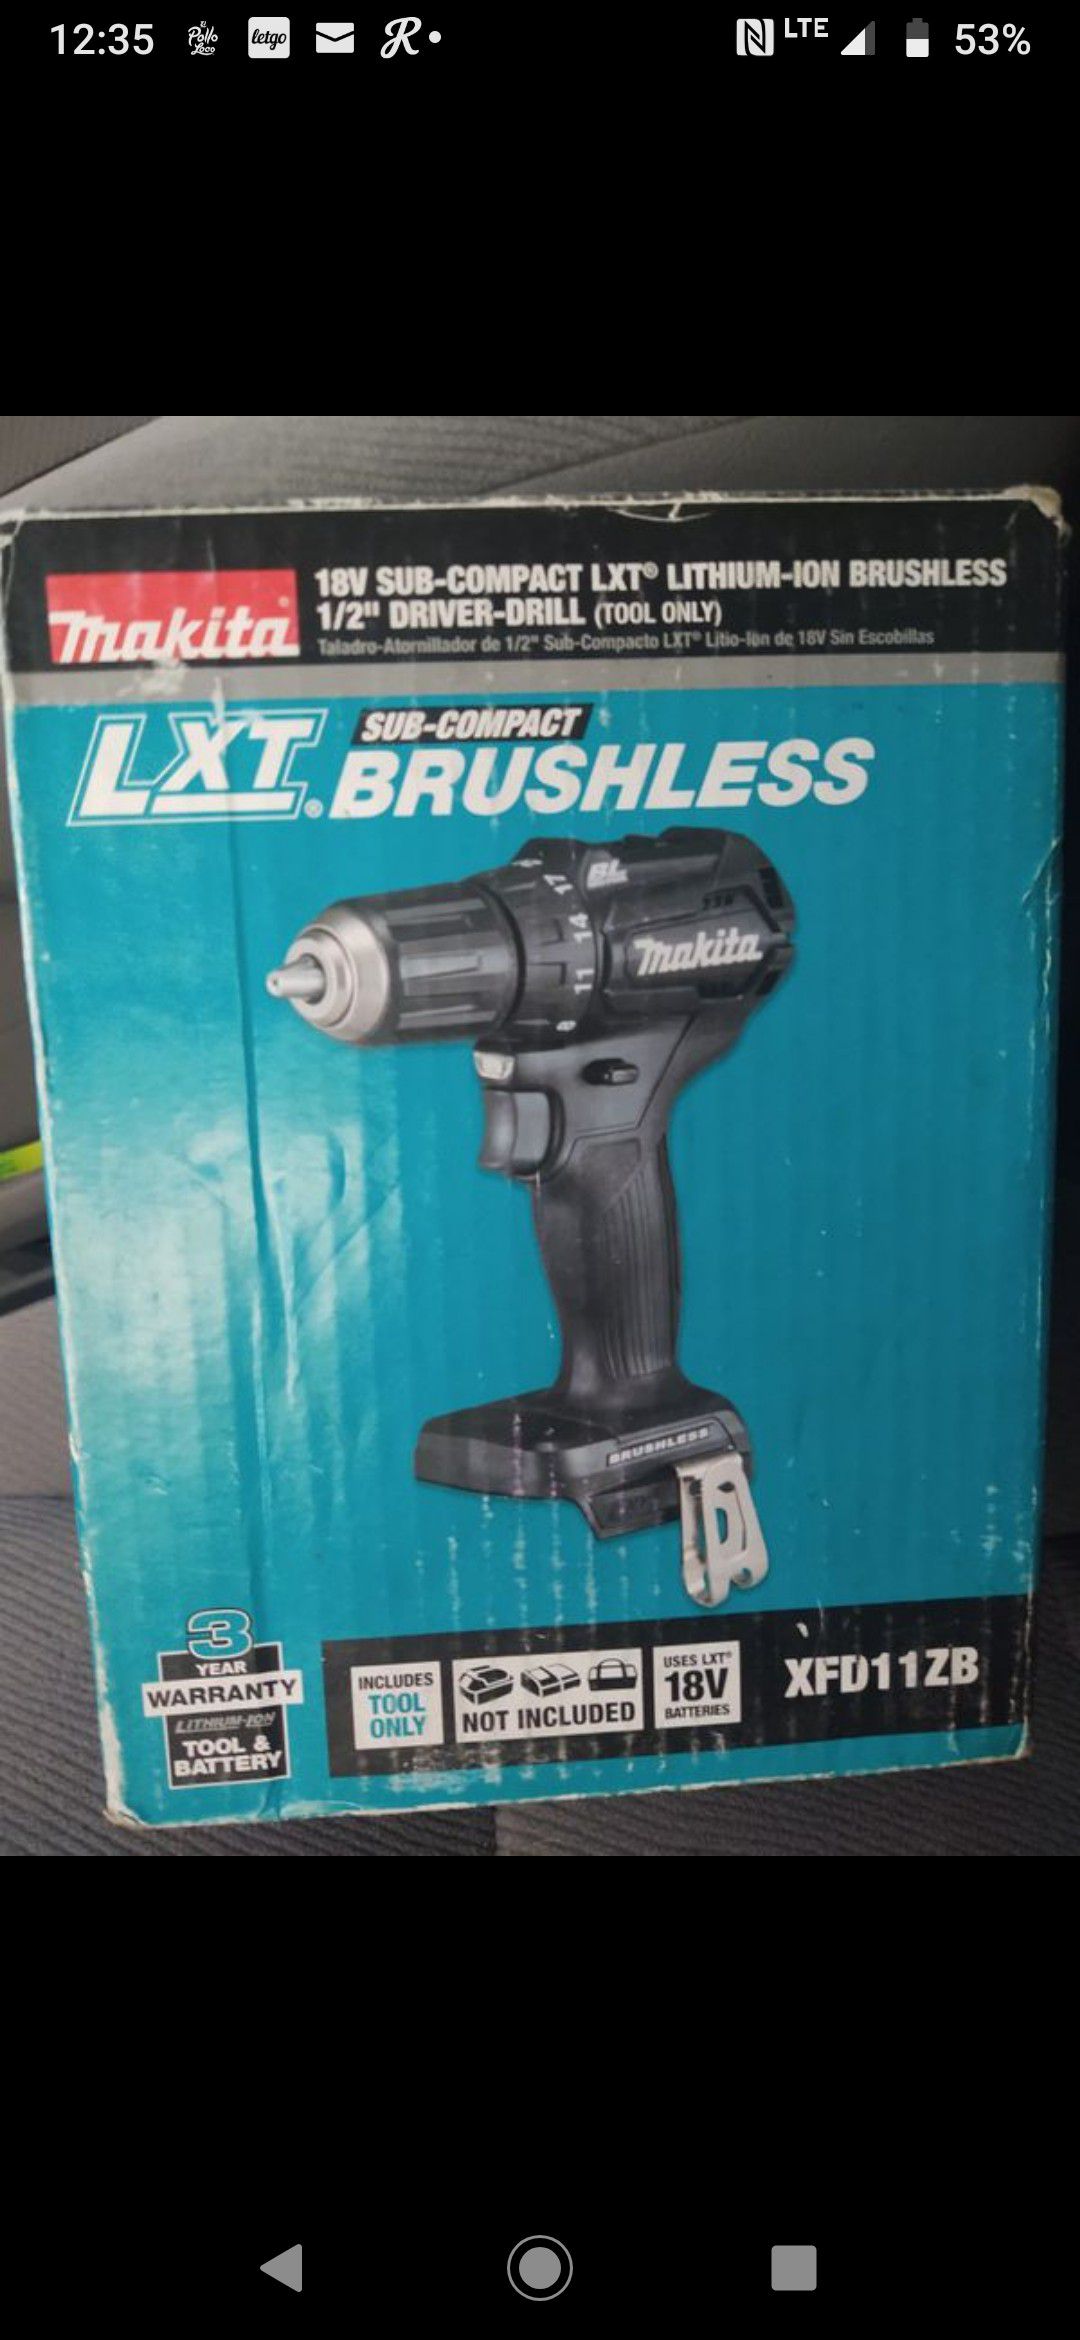 Makita compact drill brushless new (( no charger no battery)) firm$$